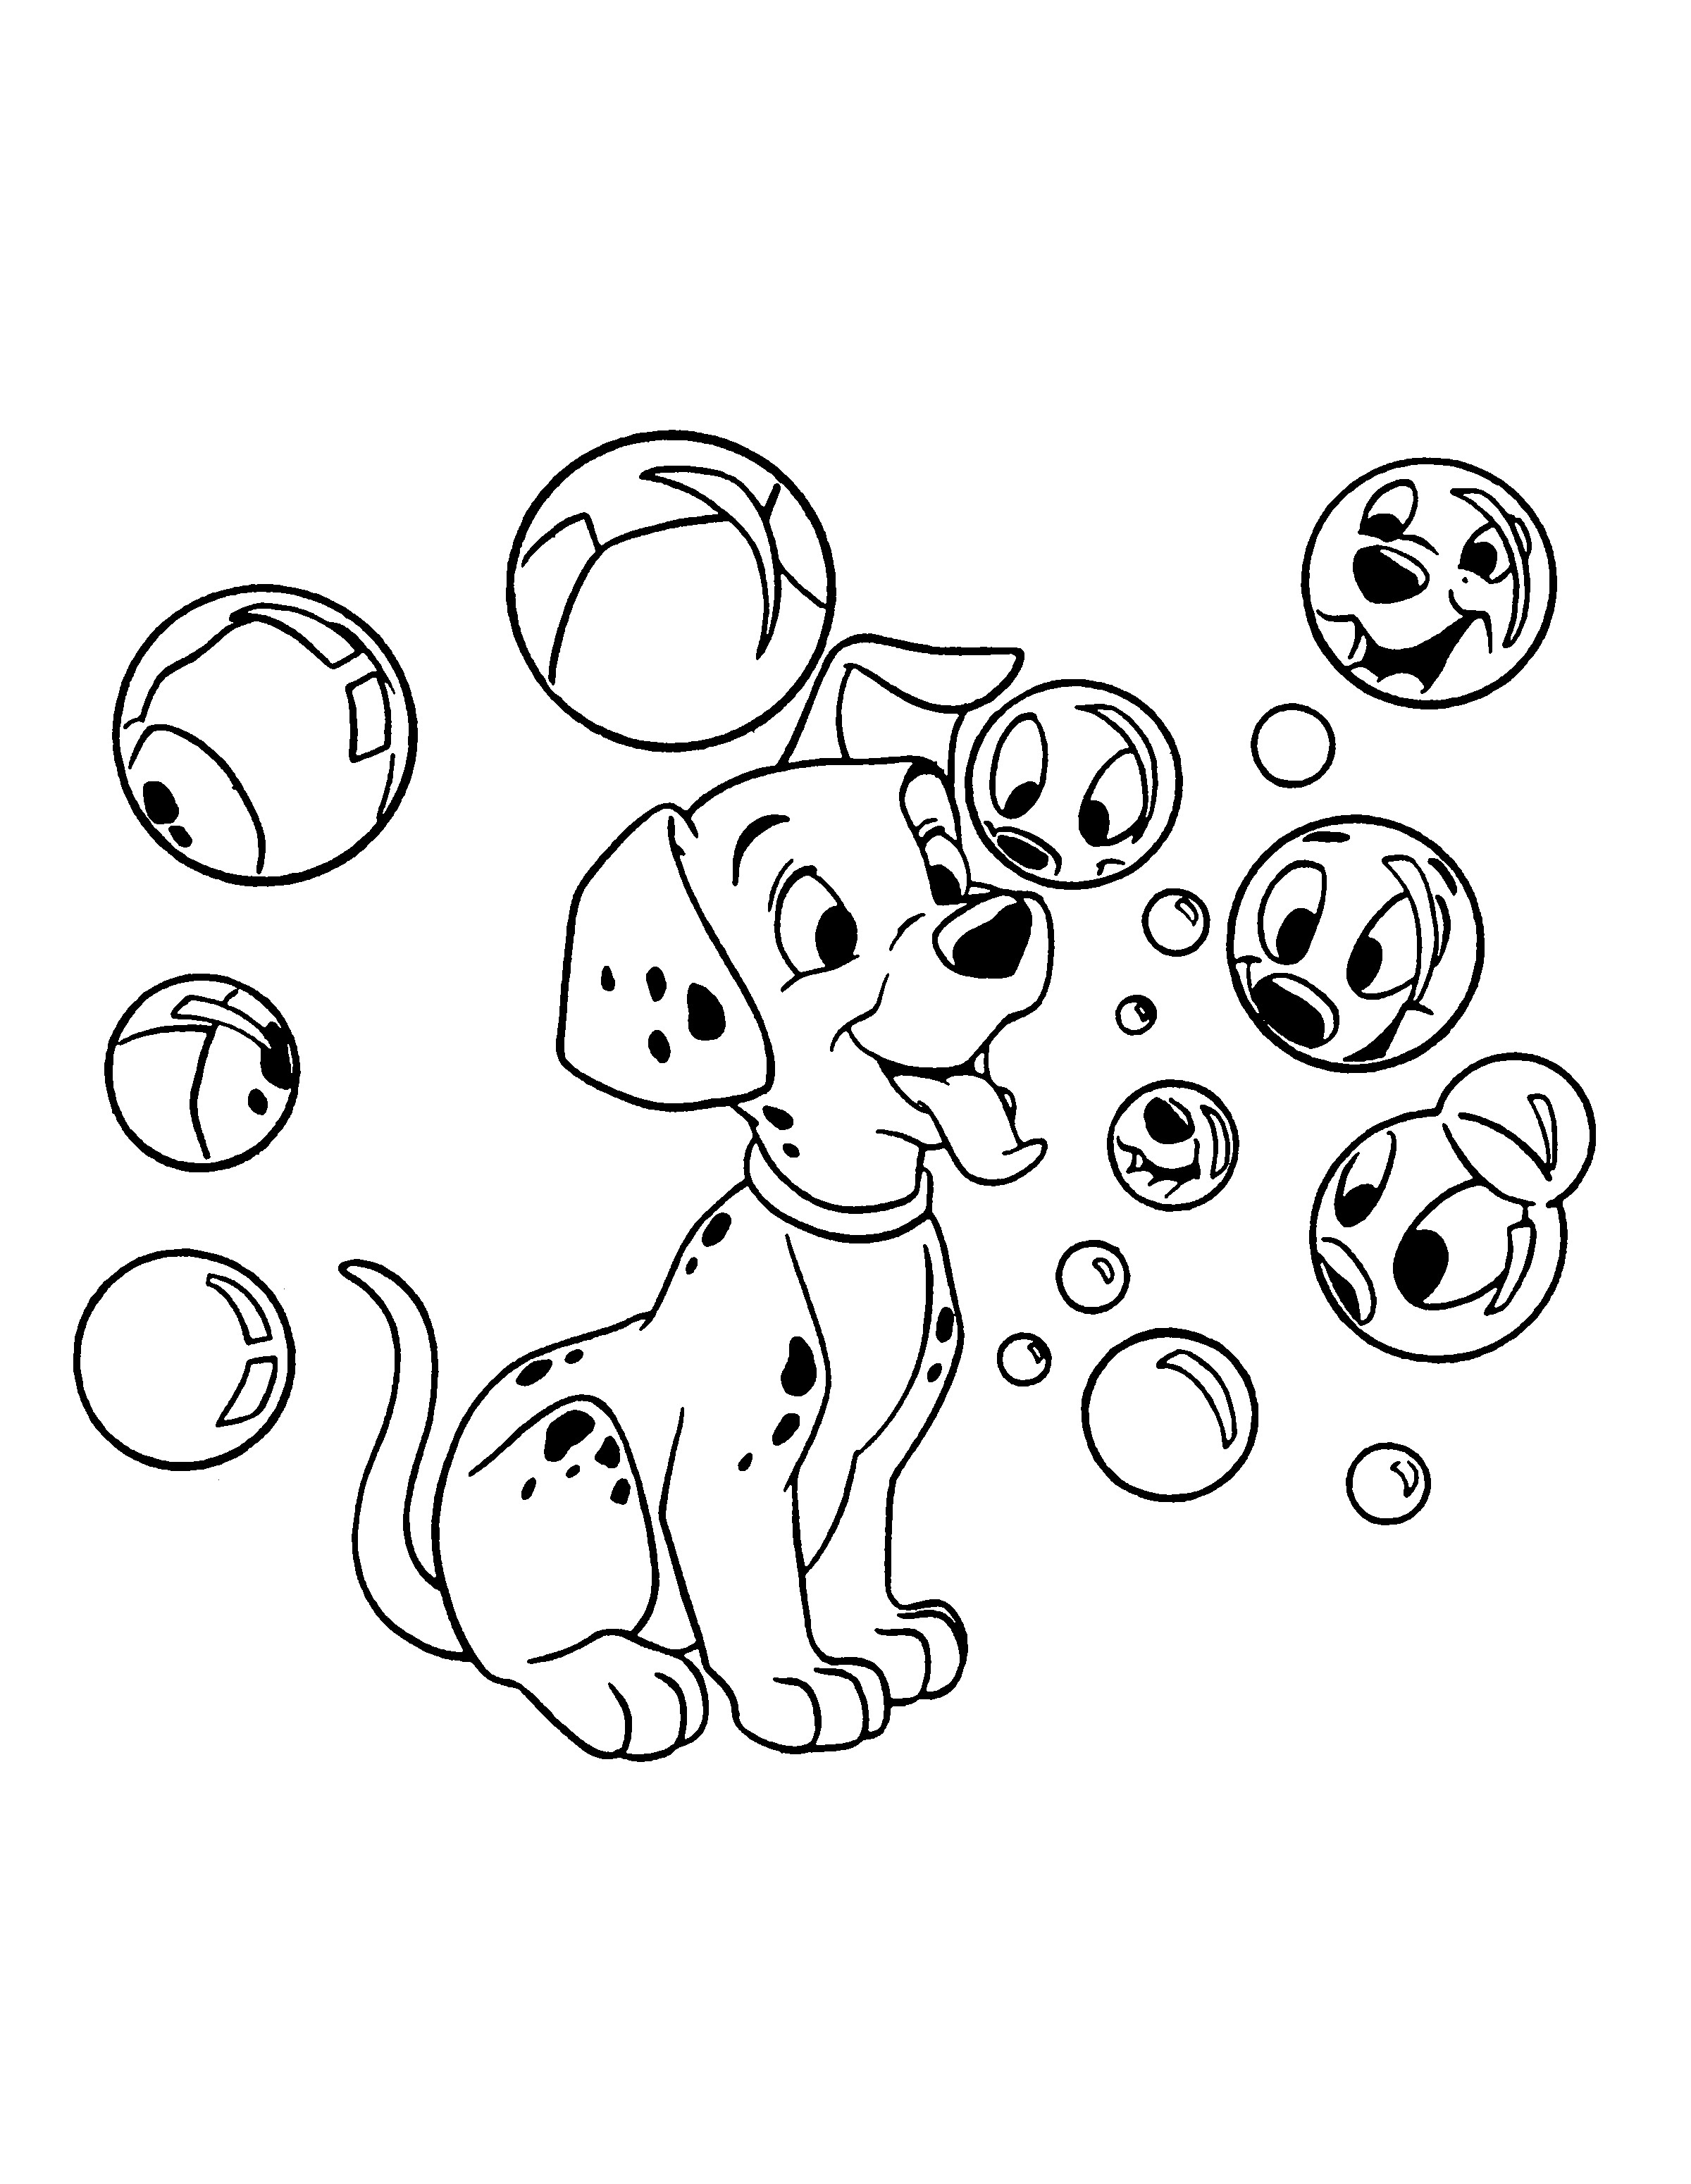 101 Dalmations Coloring Pages - Best Coloring Pages For Kids